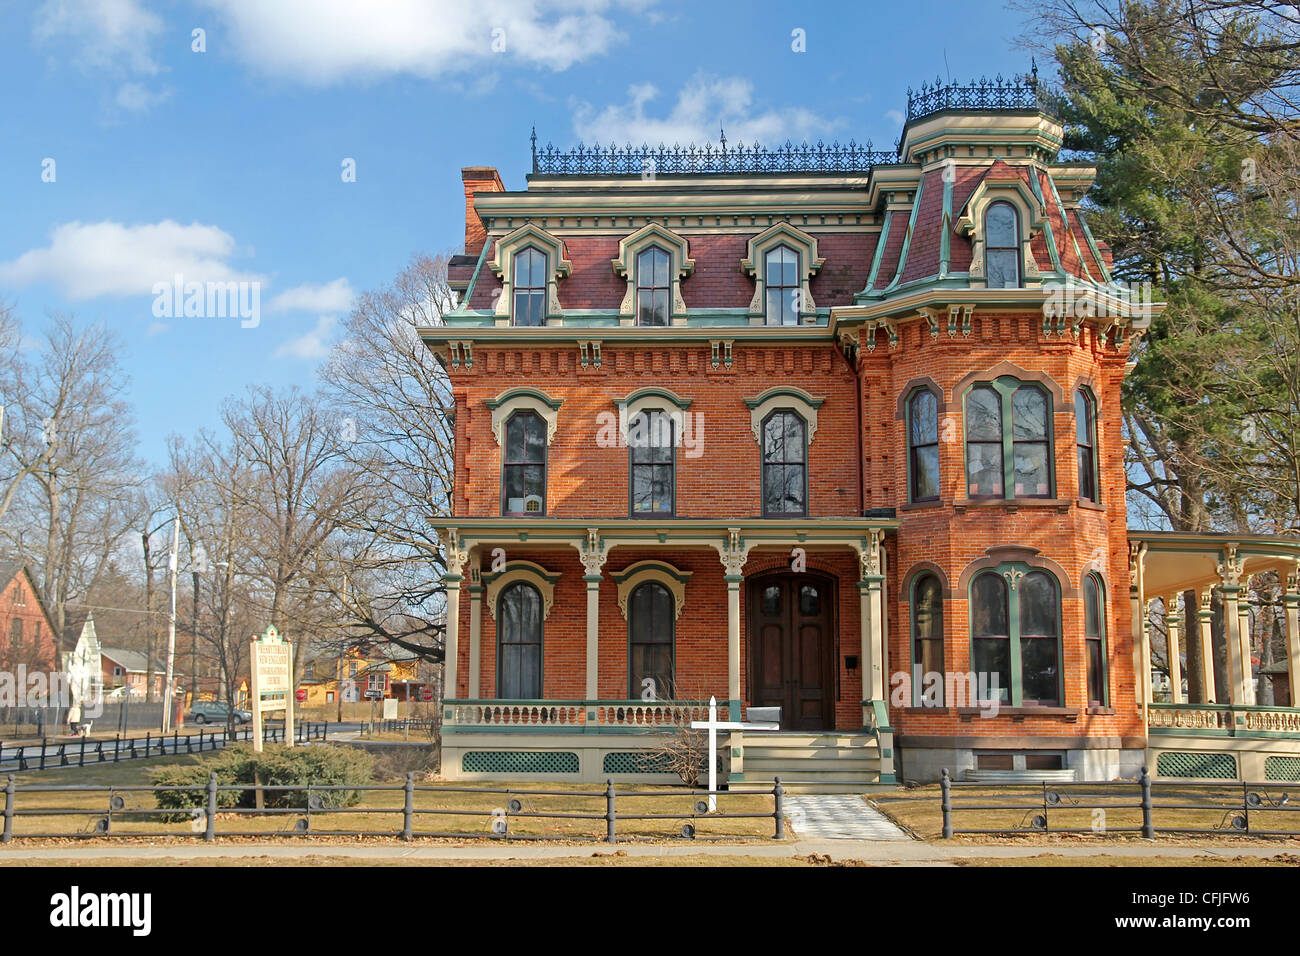 Nolan House, built in 1872, now owned by the Presbyterian Church. Saratoga Springs, New York Stock Photo